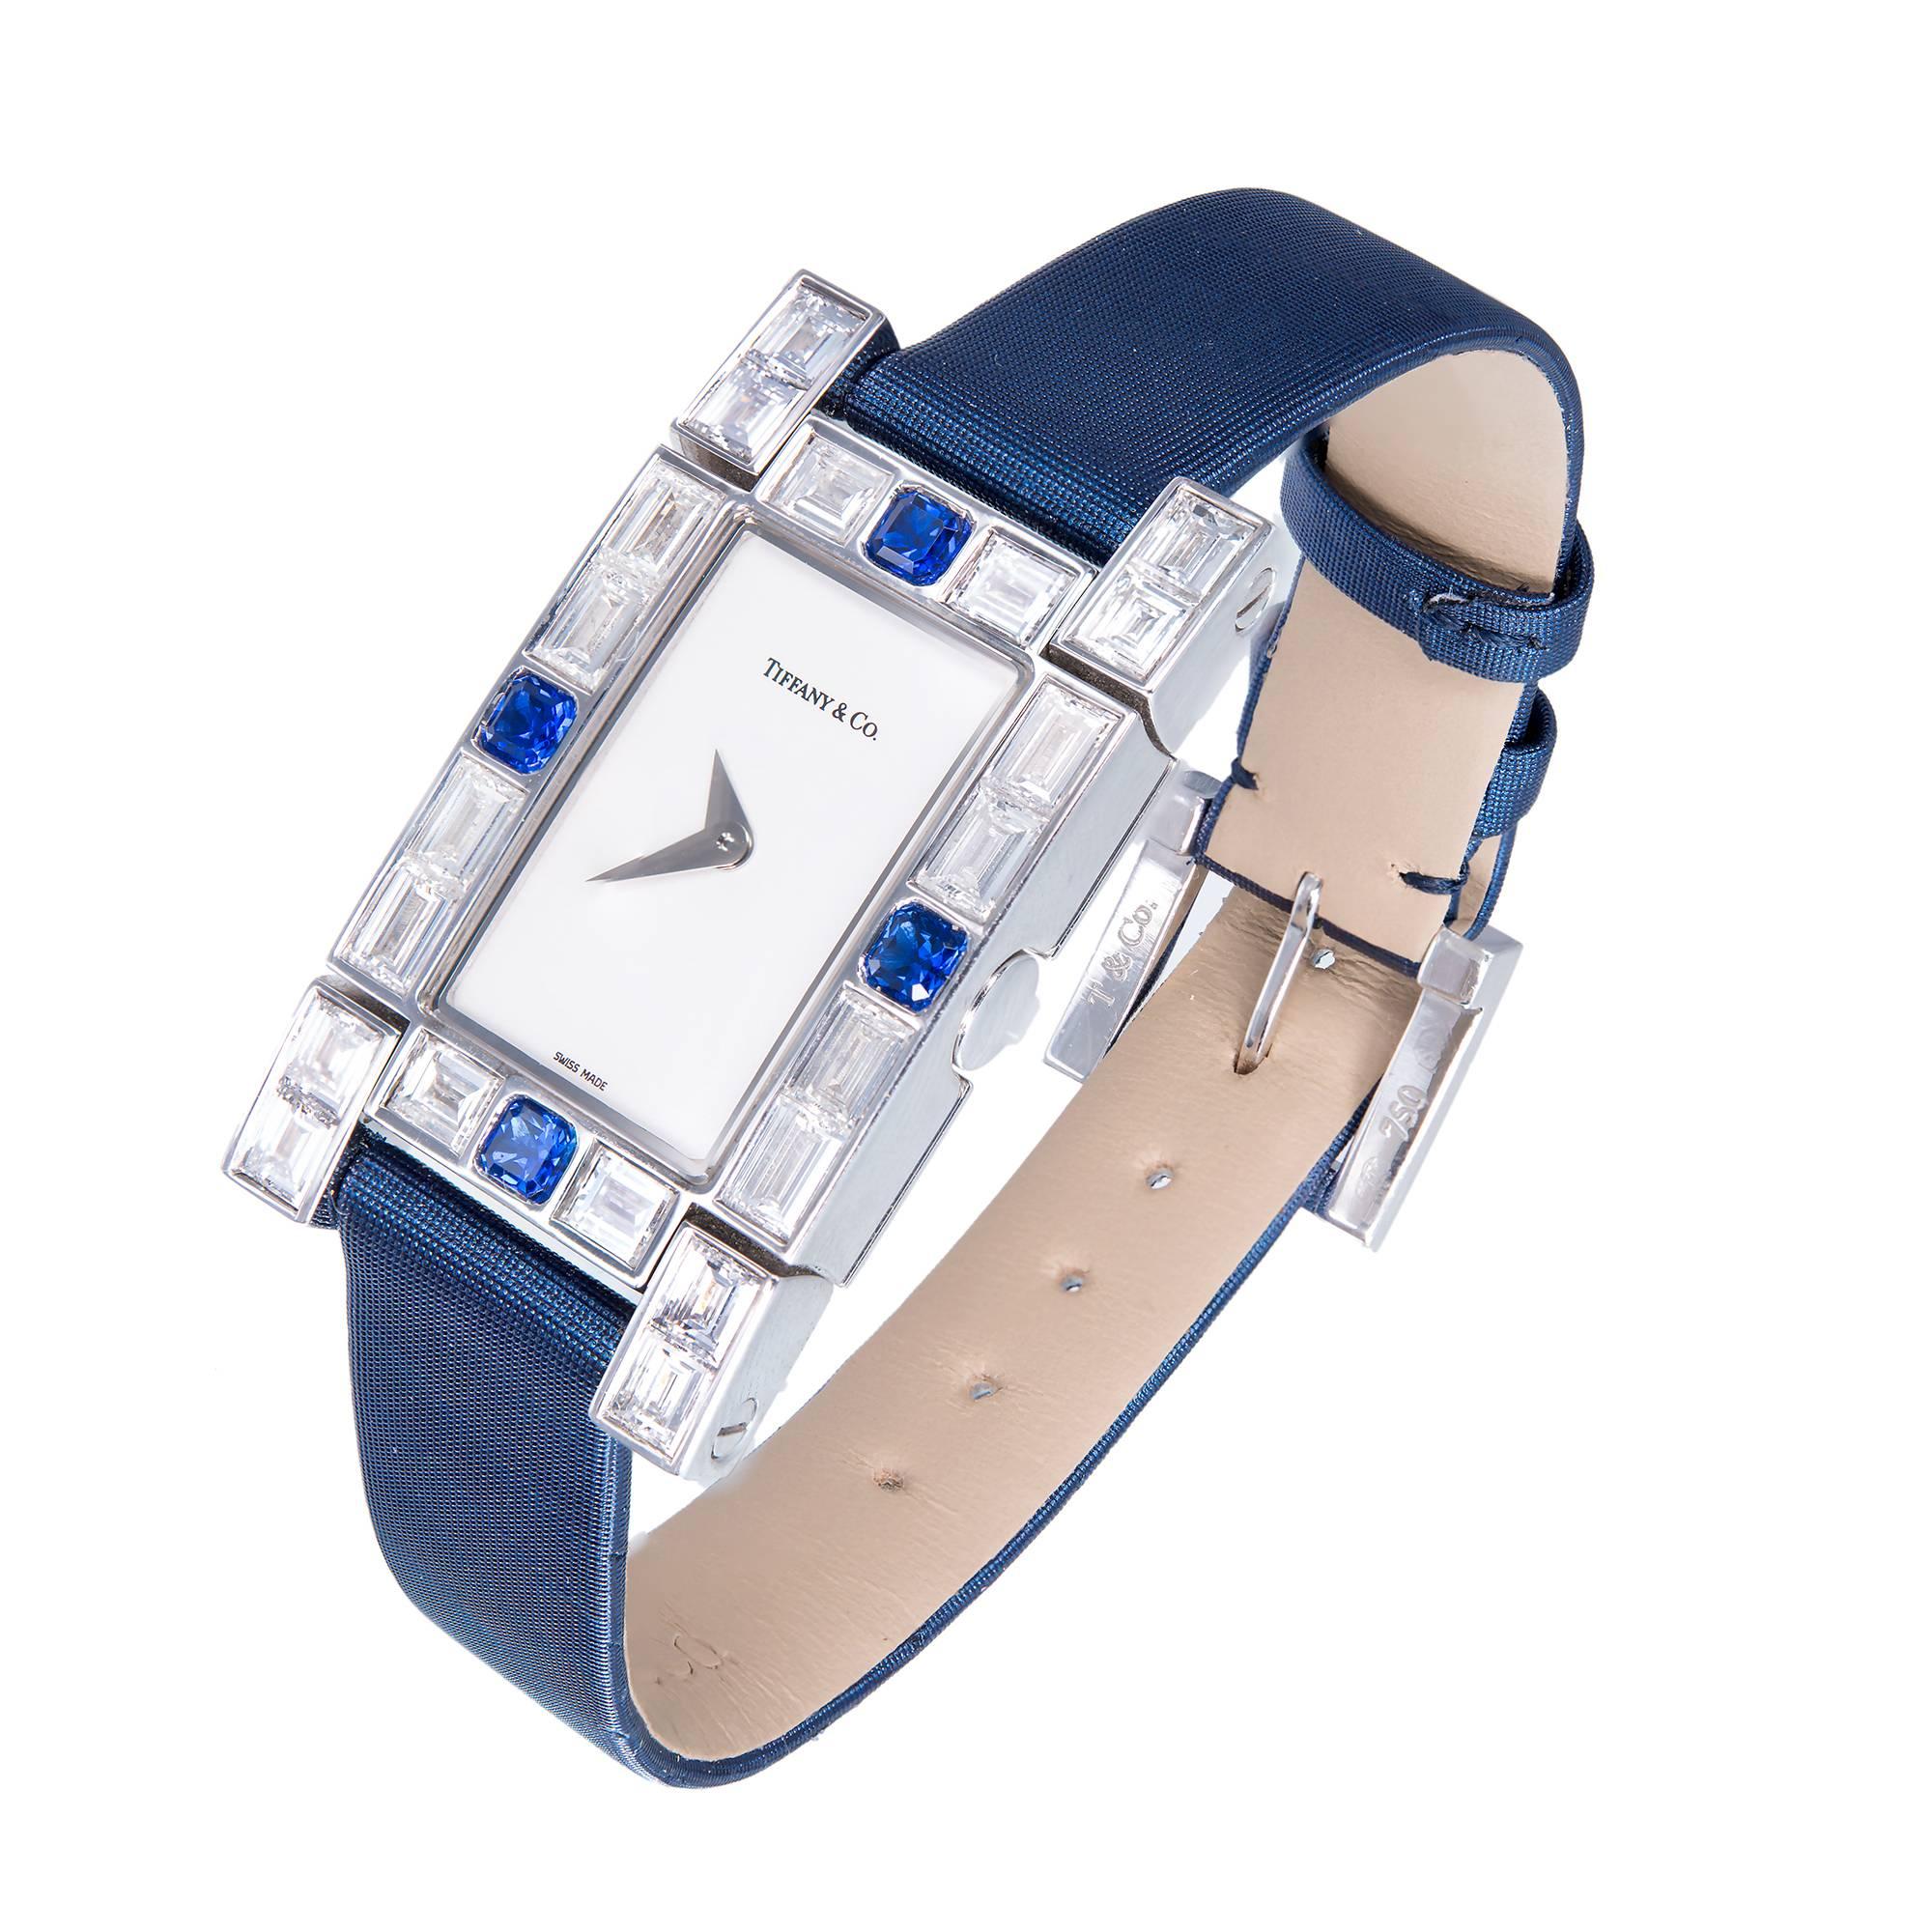 Lucida Collection diamond and sapphire 18k white gold wristwatch. White gold and diamond buckle. Fine bright blue sapphires, fine white diamonds. Blue Tiffany band. Original box included.

30 emerald and baguette cut diamonds 5ct total weight  F